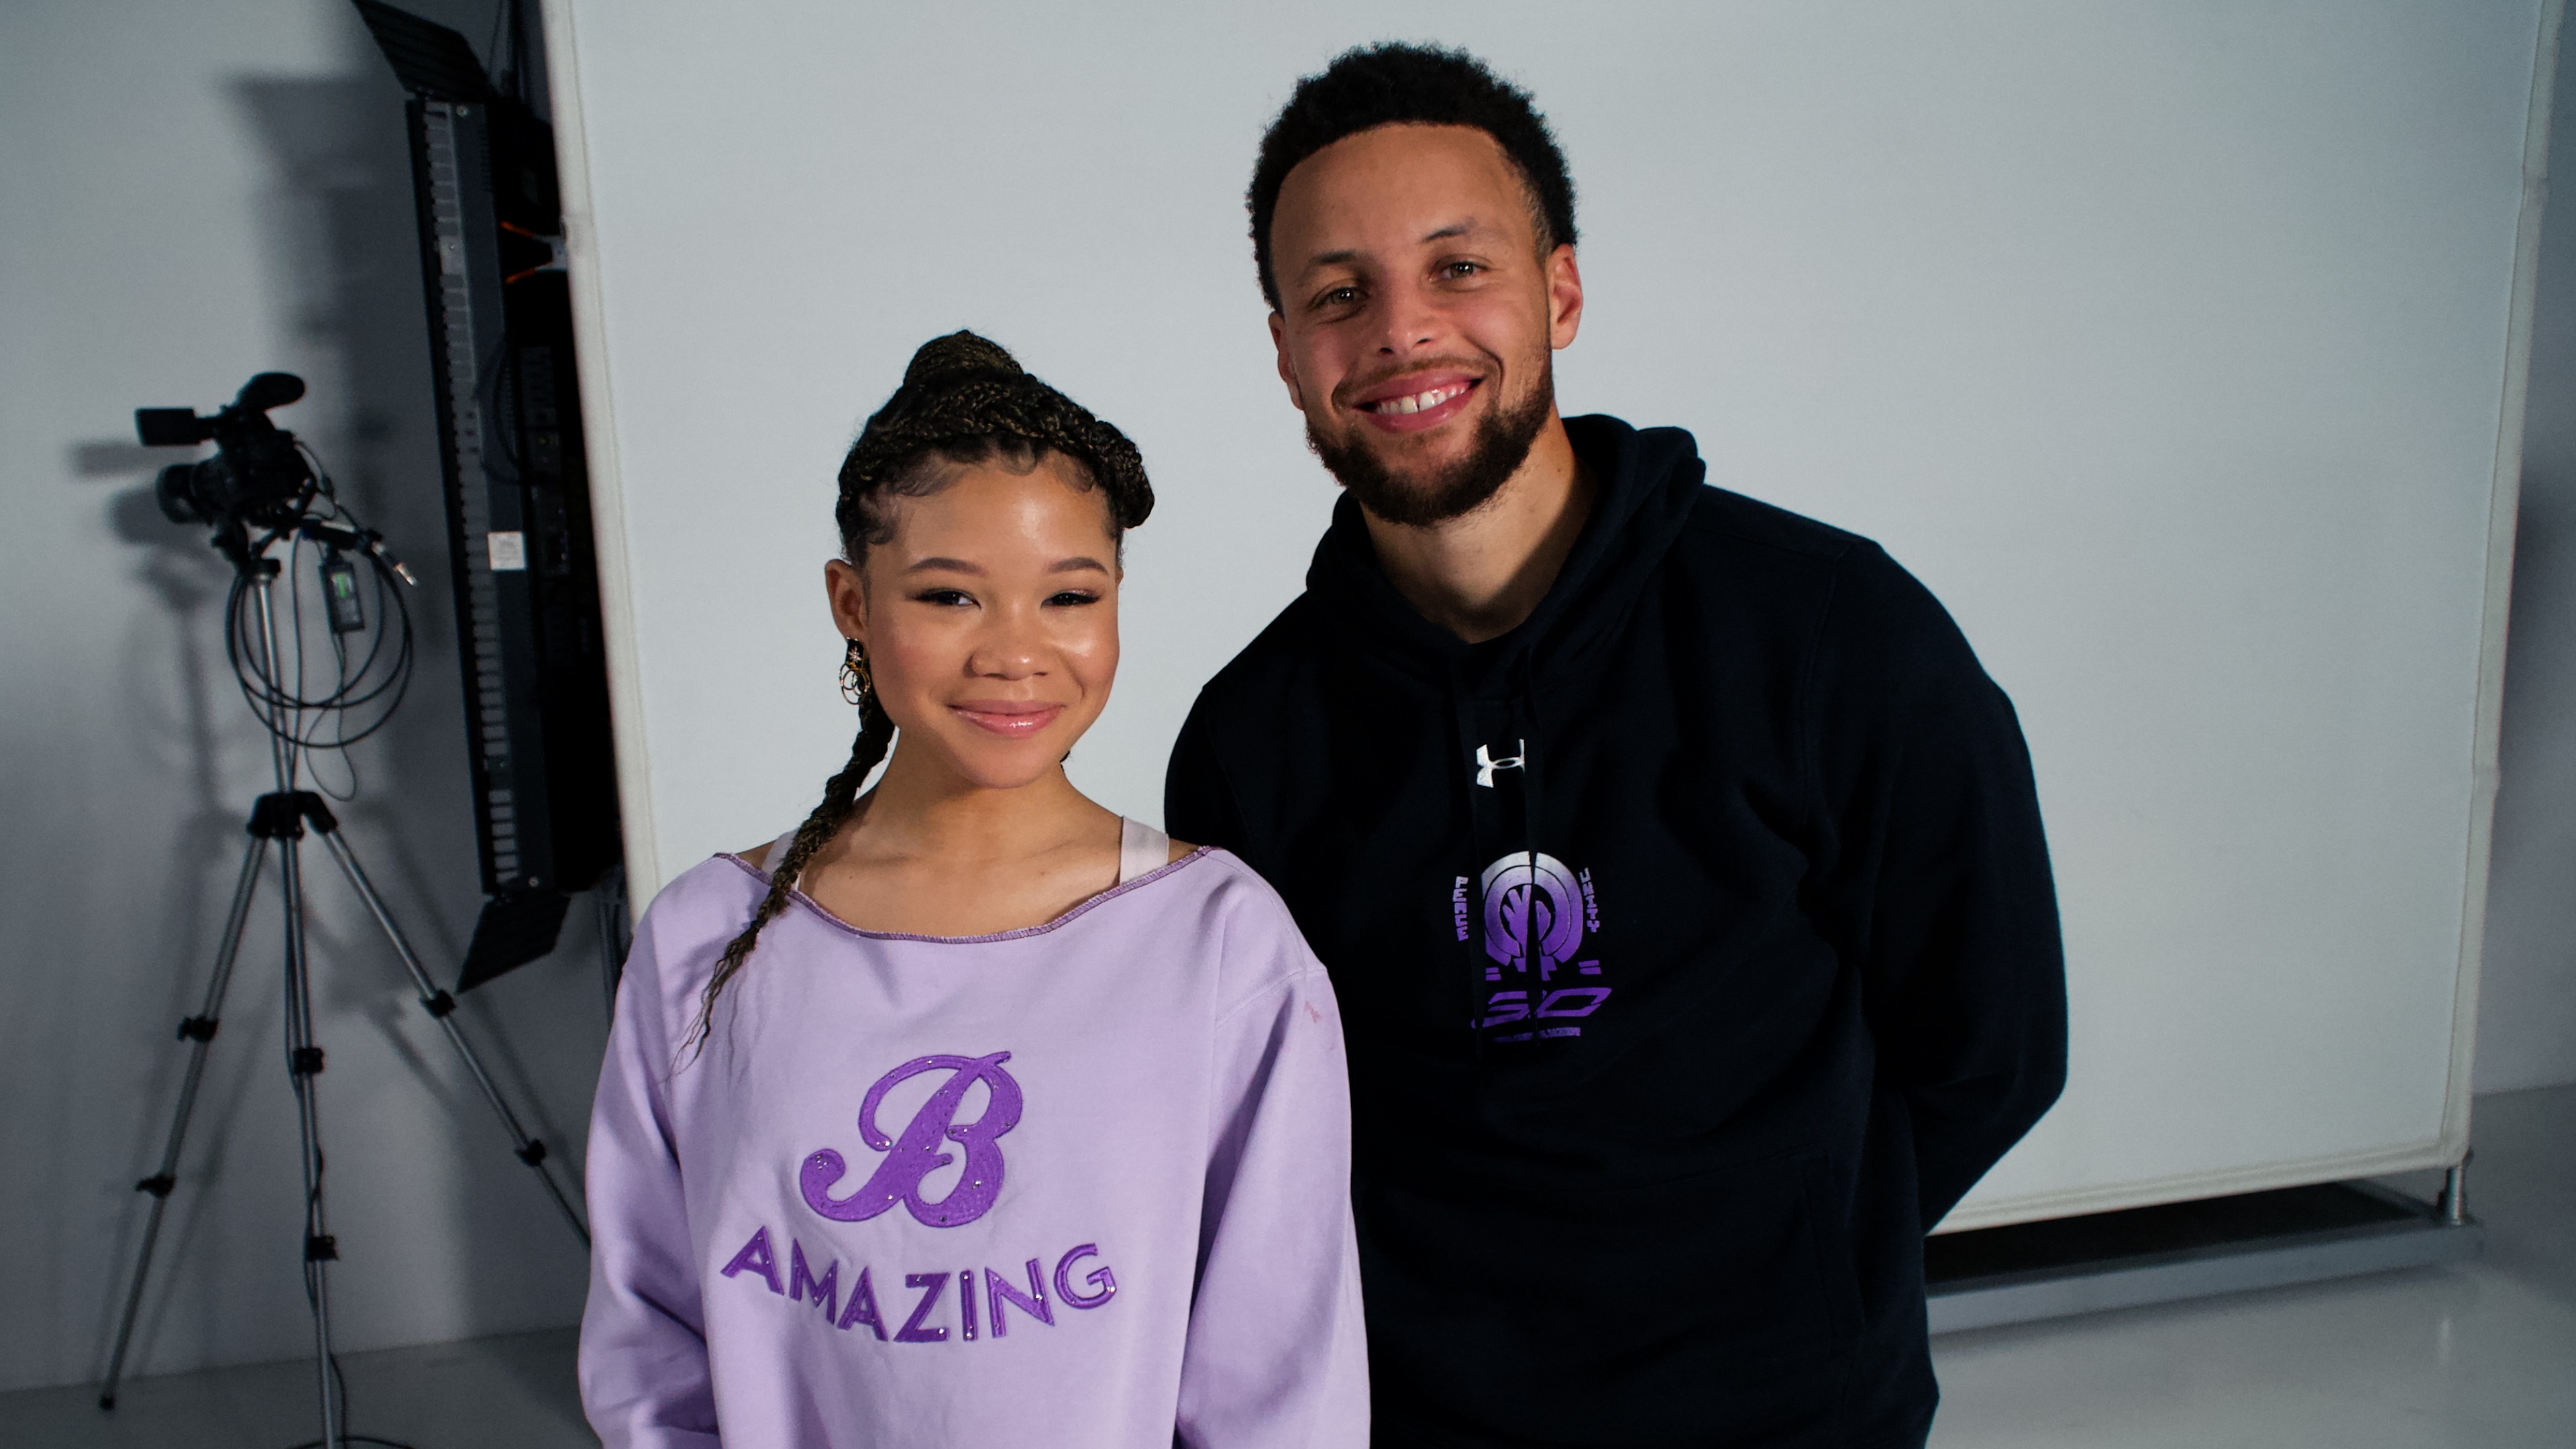 Storm Reid and Steph Curry’s Sneaker Partnership Celebrates the Next Generation of Women